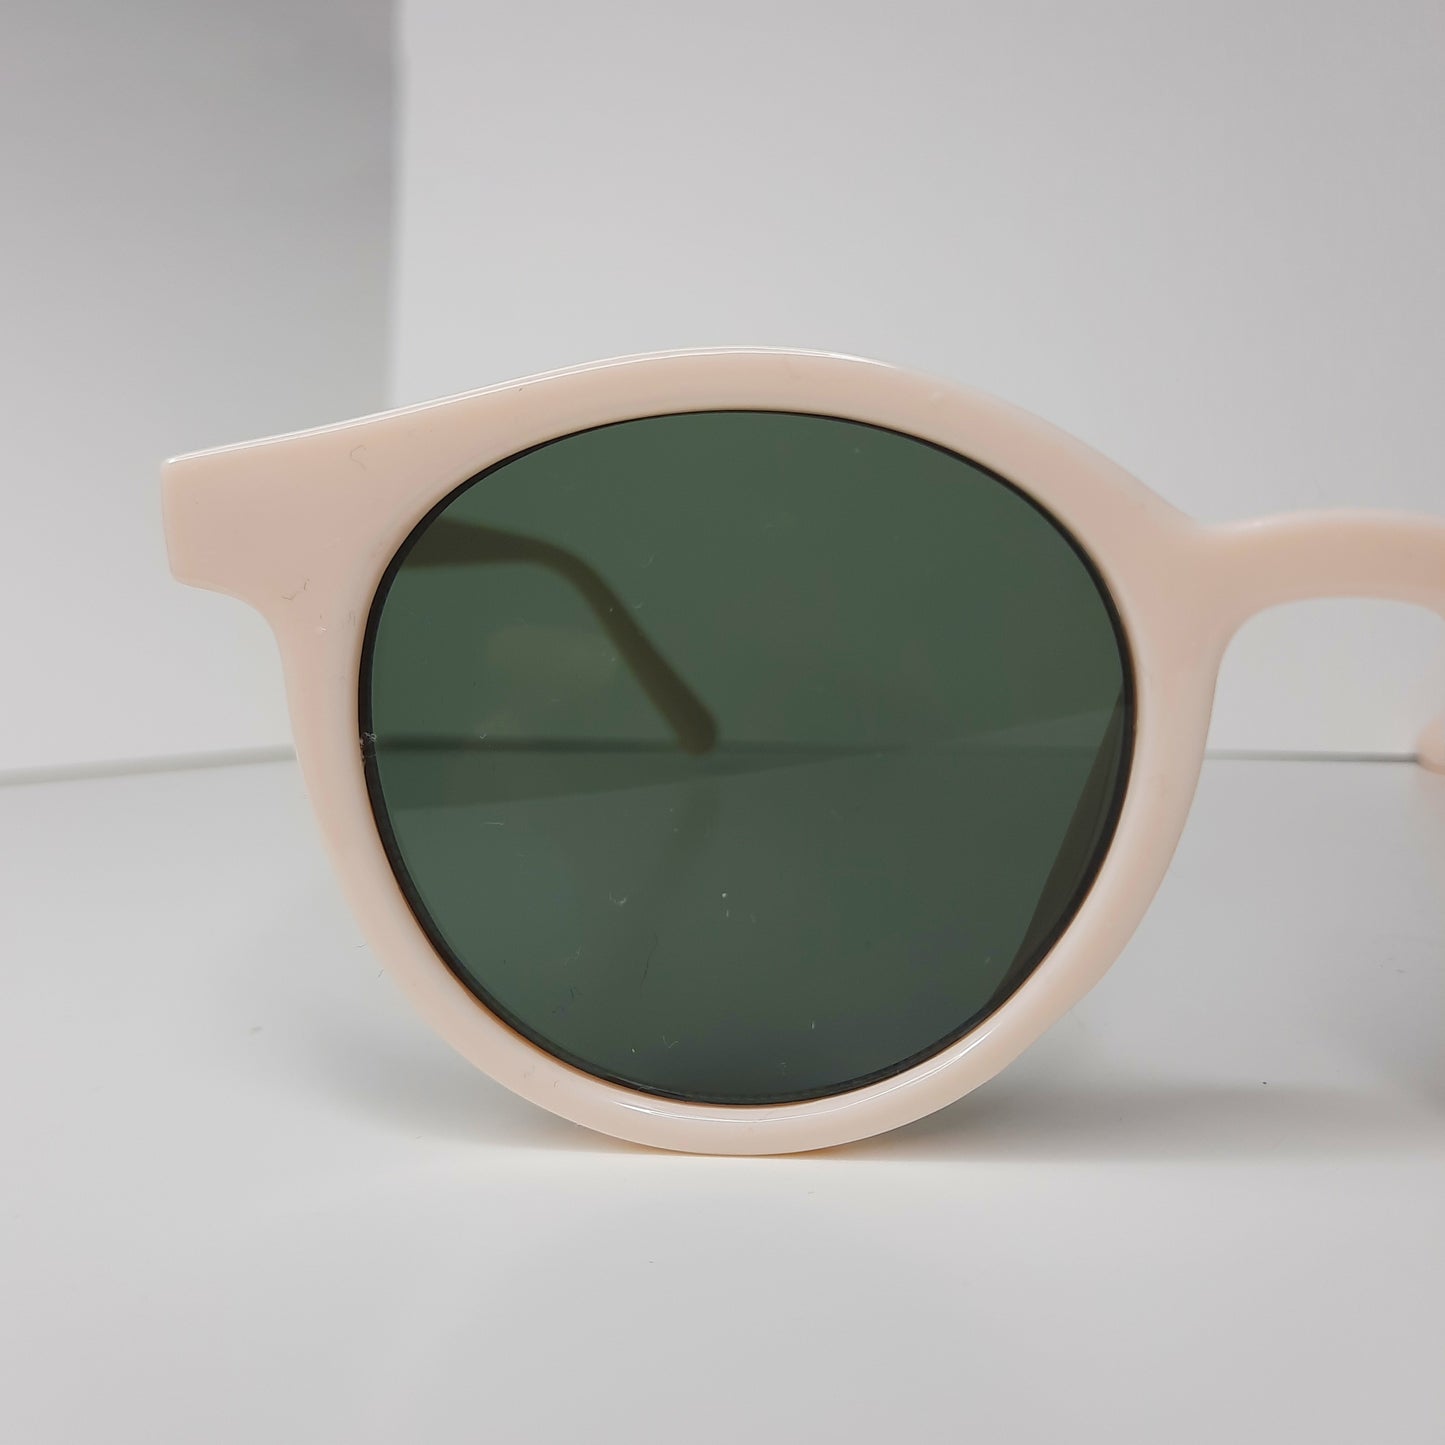 Breezy Rounded Sunglasses (Cream, Black, Brown)